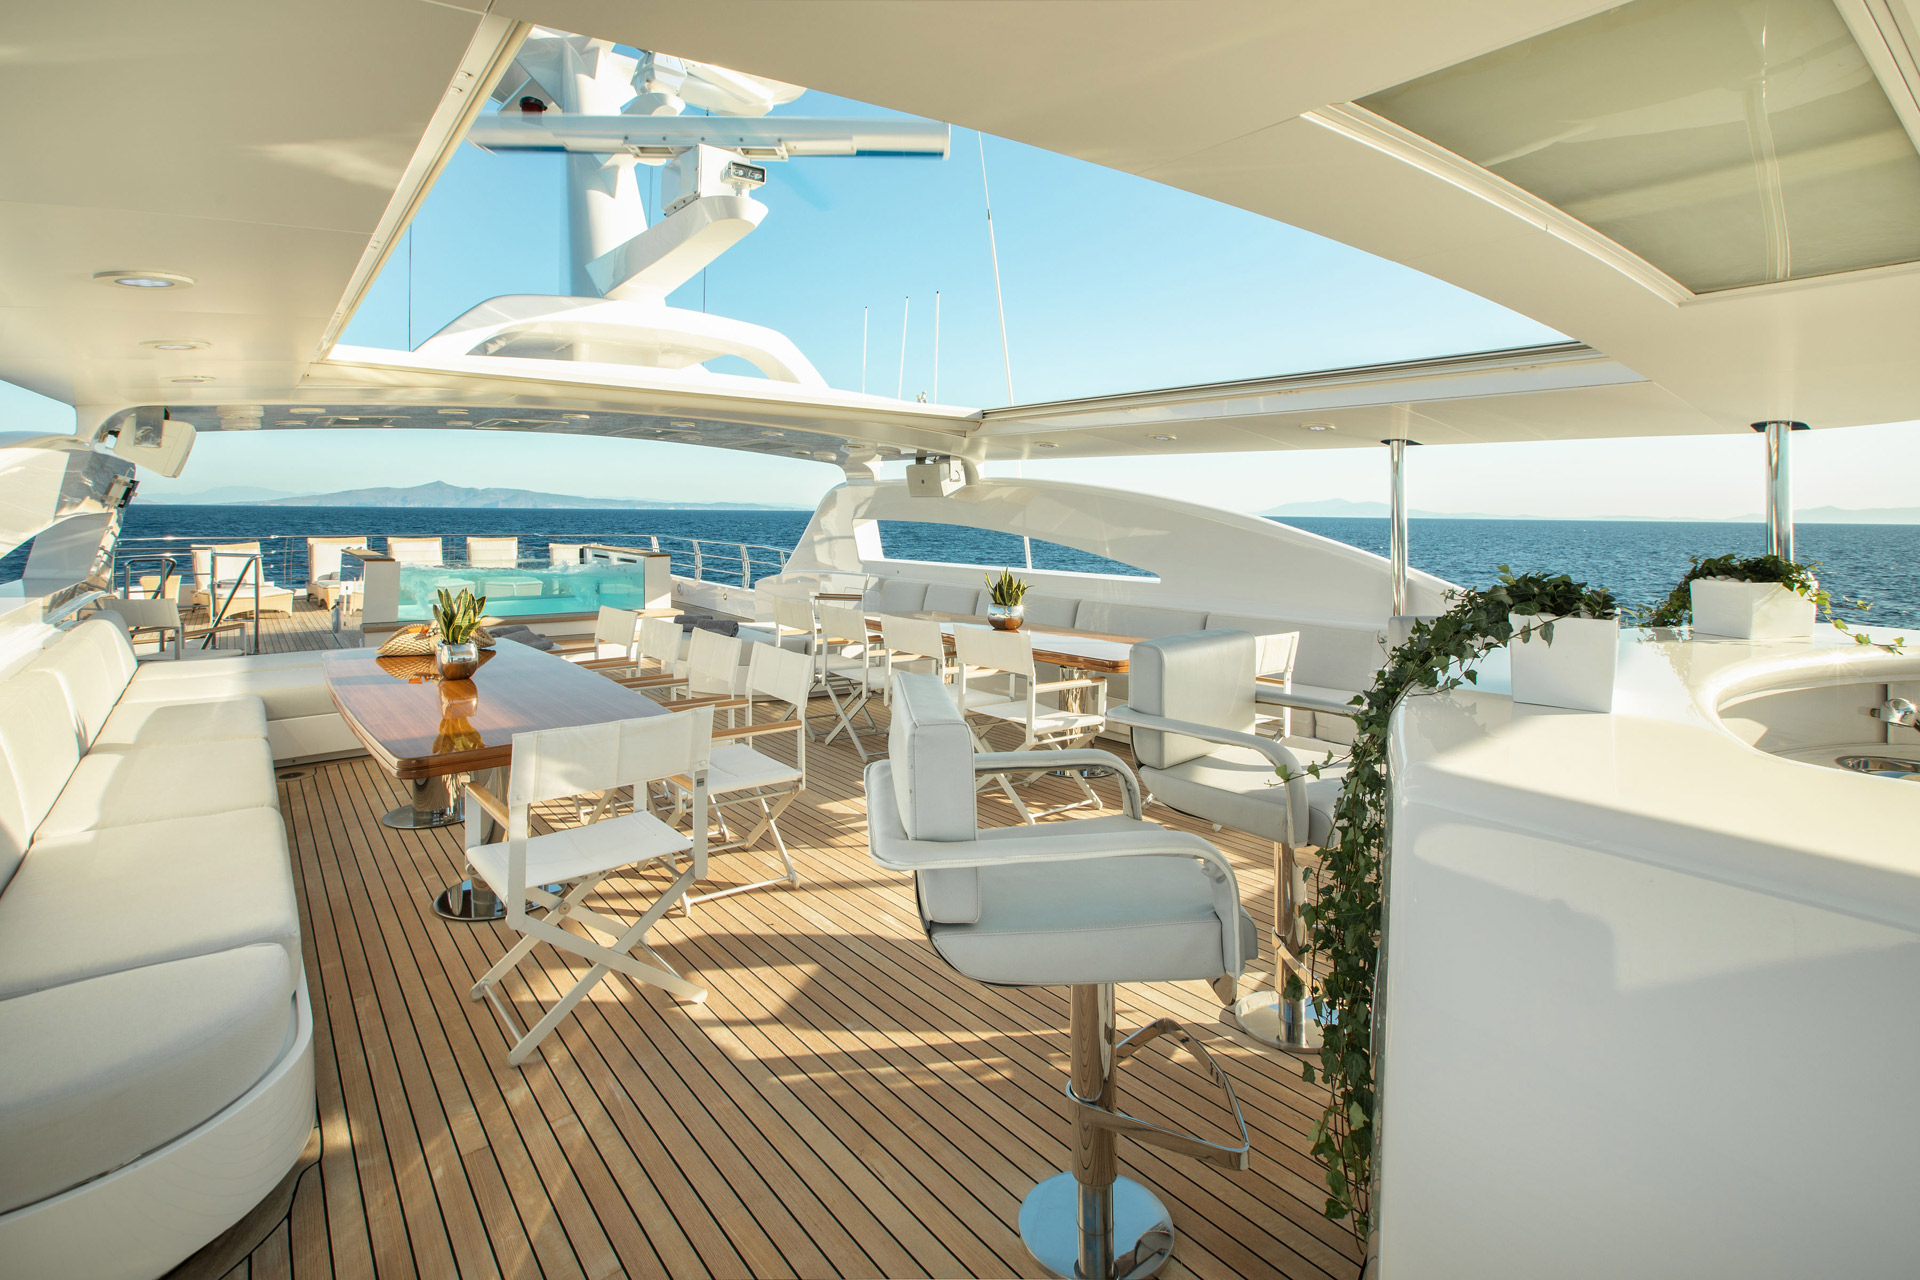 Sun Deck With Jacuzzi And Bar